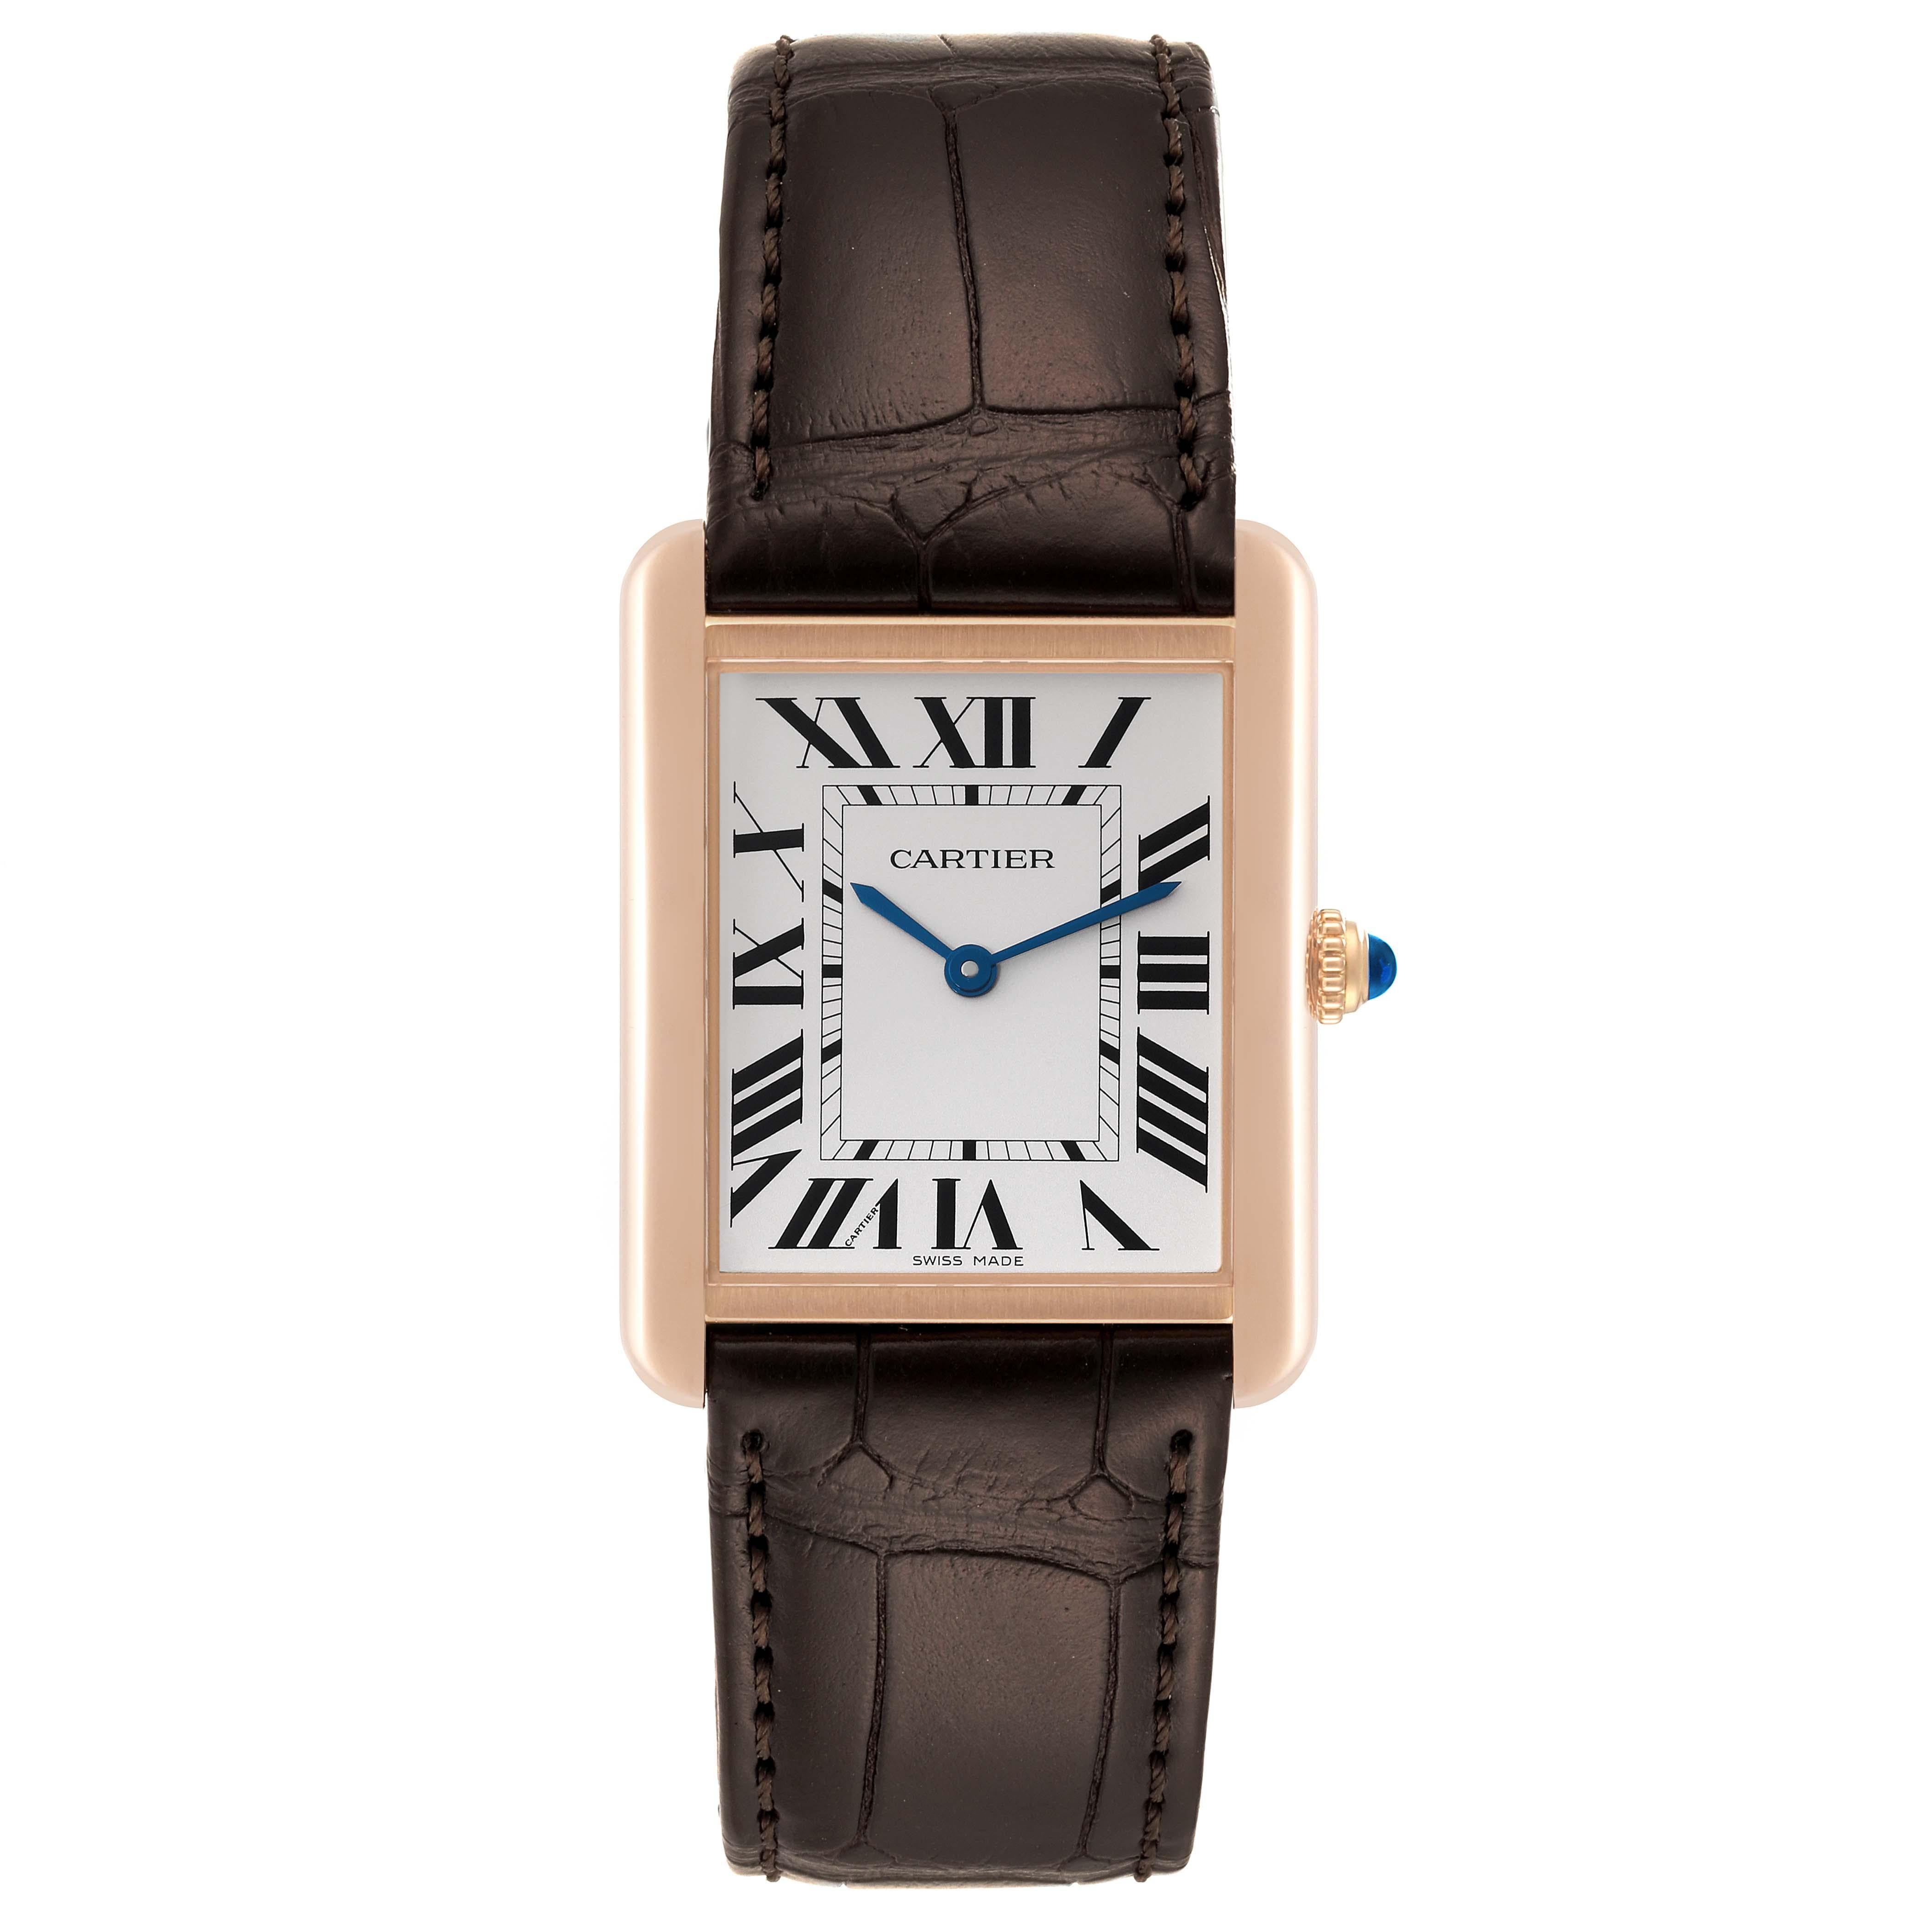 Cartier Tank Solo Large Rose Gold Steel Brown Strap Mens Watch W5200025 Card. Quartz movement. 18k rose gold case 34.0 x 27.0 mm. Stainless steel caseback. Circular grained crown set with a blue spinel cabochon. . Scratch resistant sapphire crystal.